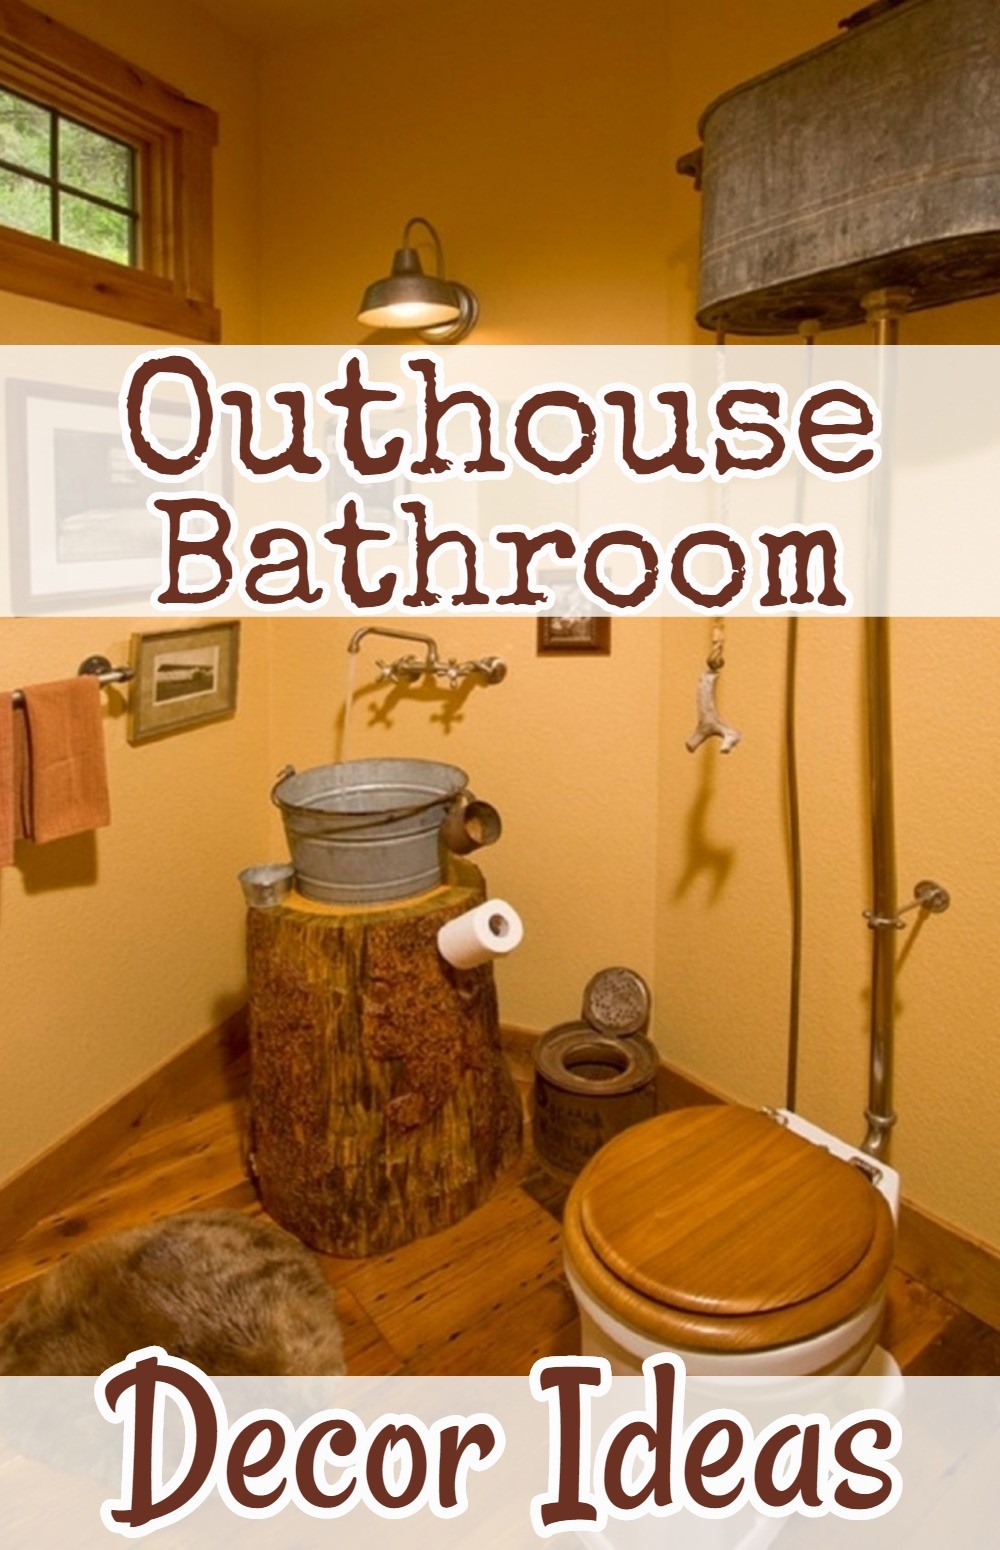 Country Outhouse Bathroom Decorating Ideas Outhouse Bathroom Decor,How To Crochet A Scarf For The Complete Beginner